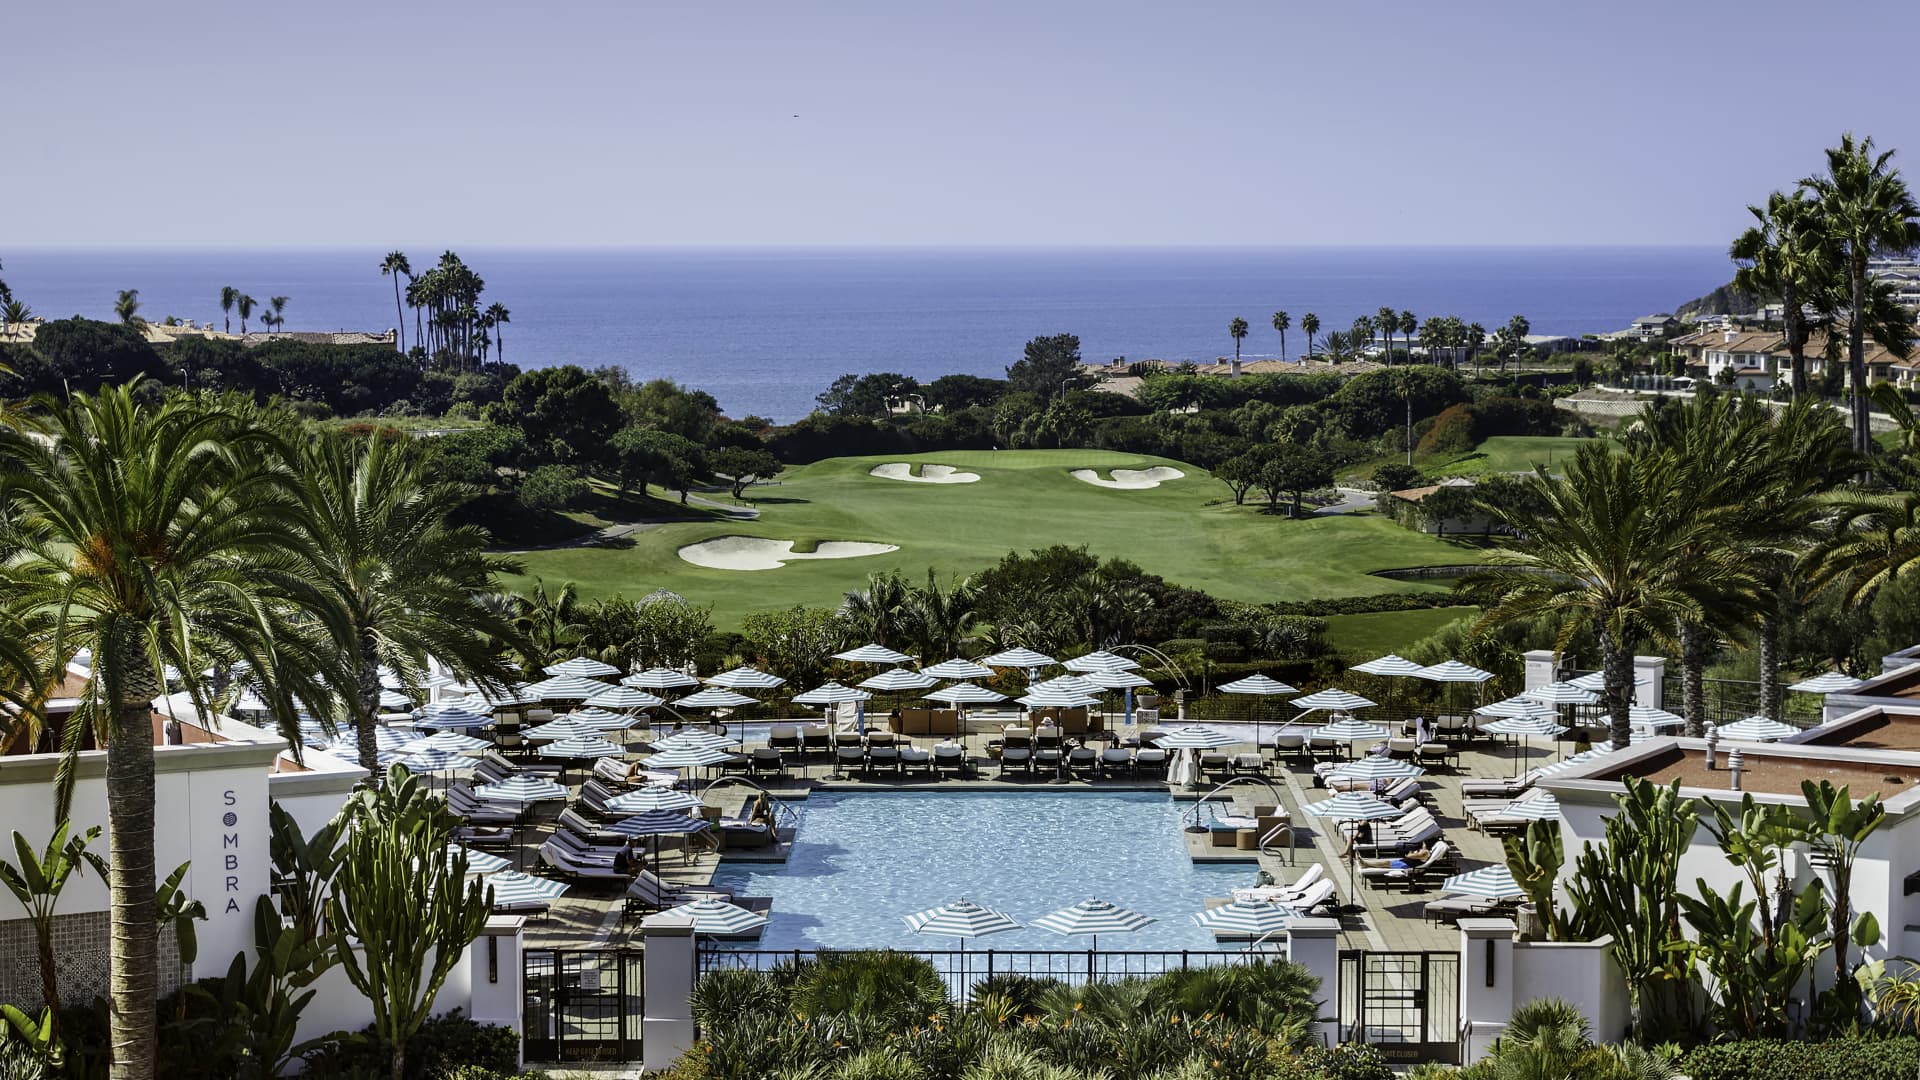 December bookings at high-end hotels, like the Waldorf Astoria Monarch Beach in Dana Point, California, will likely sell out sooner than they did in 2019, according to owner Ohana Real Estate Investors.